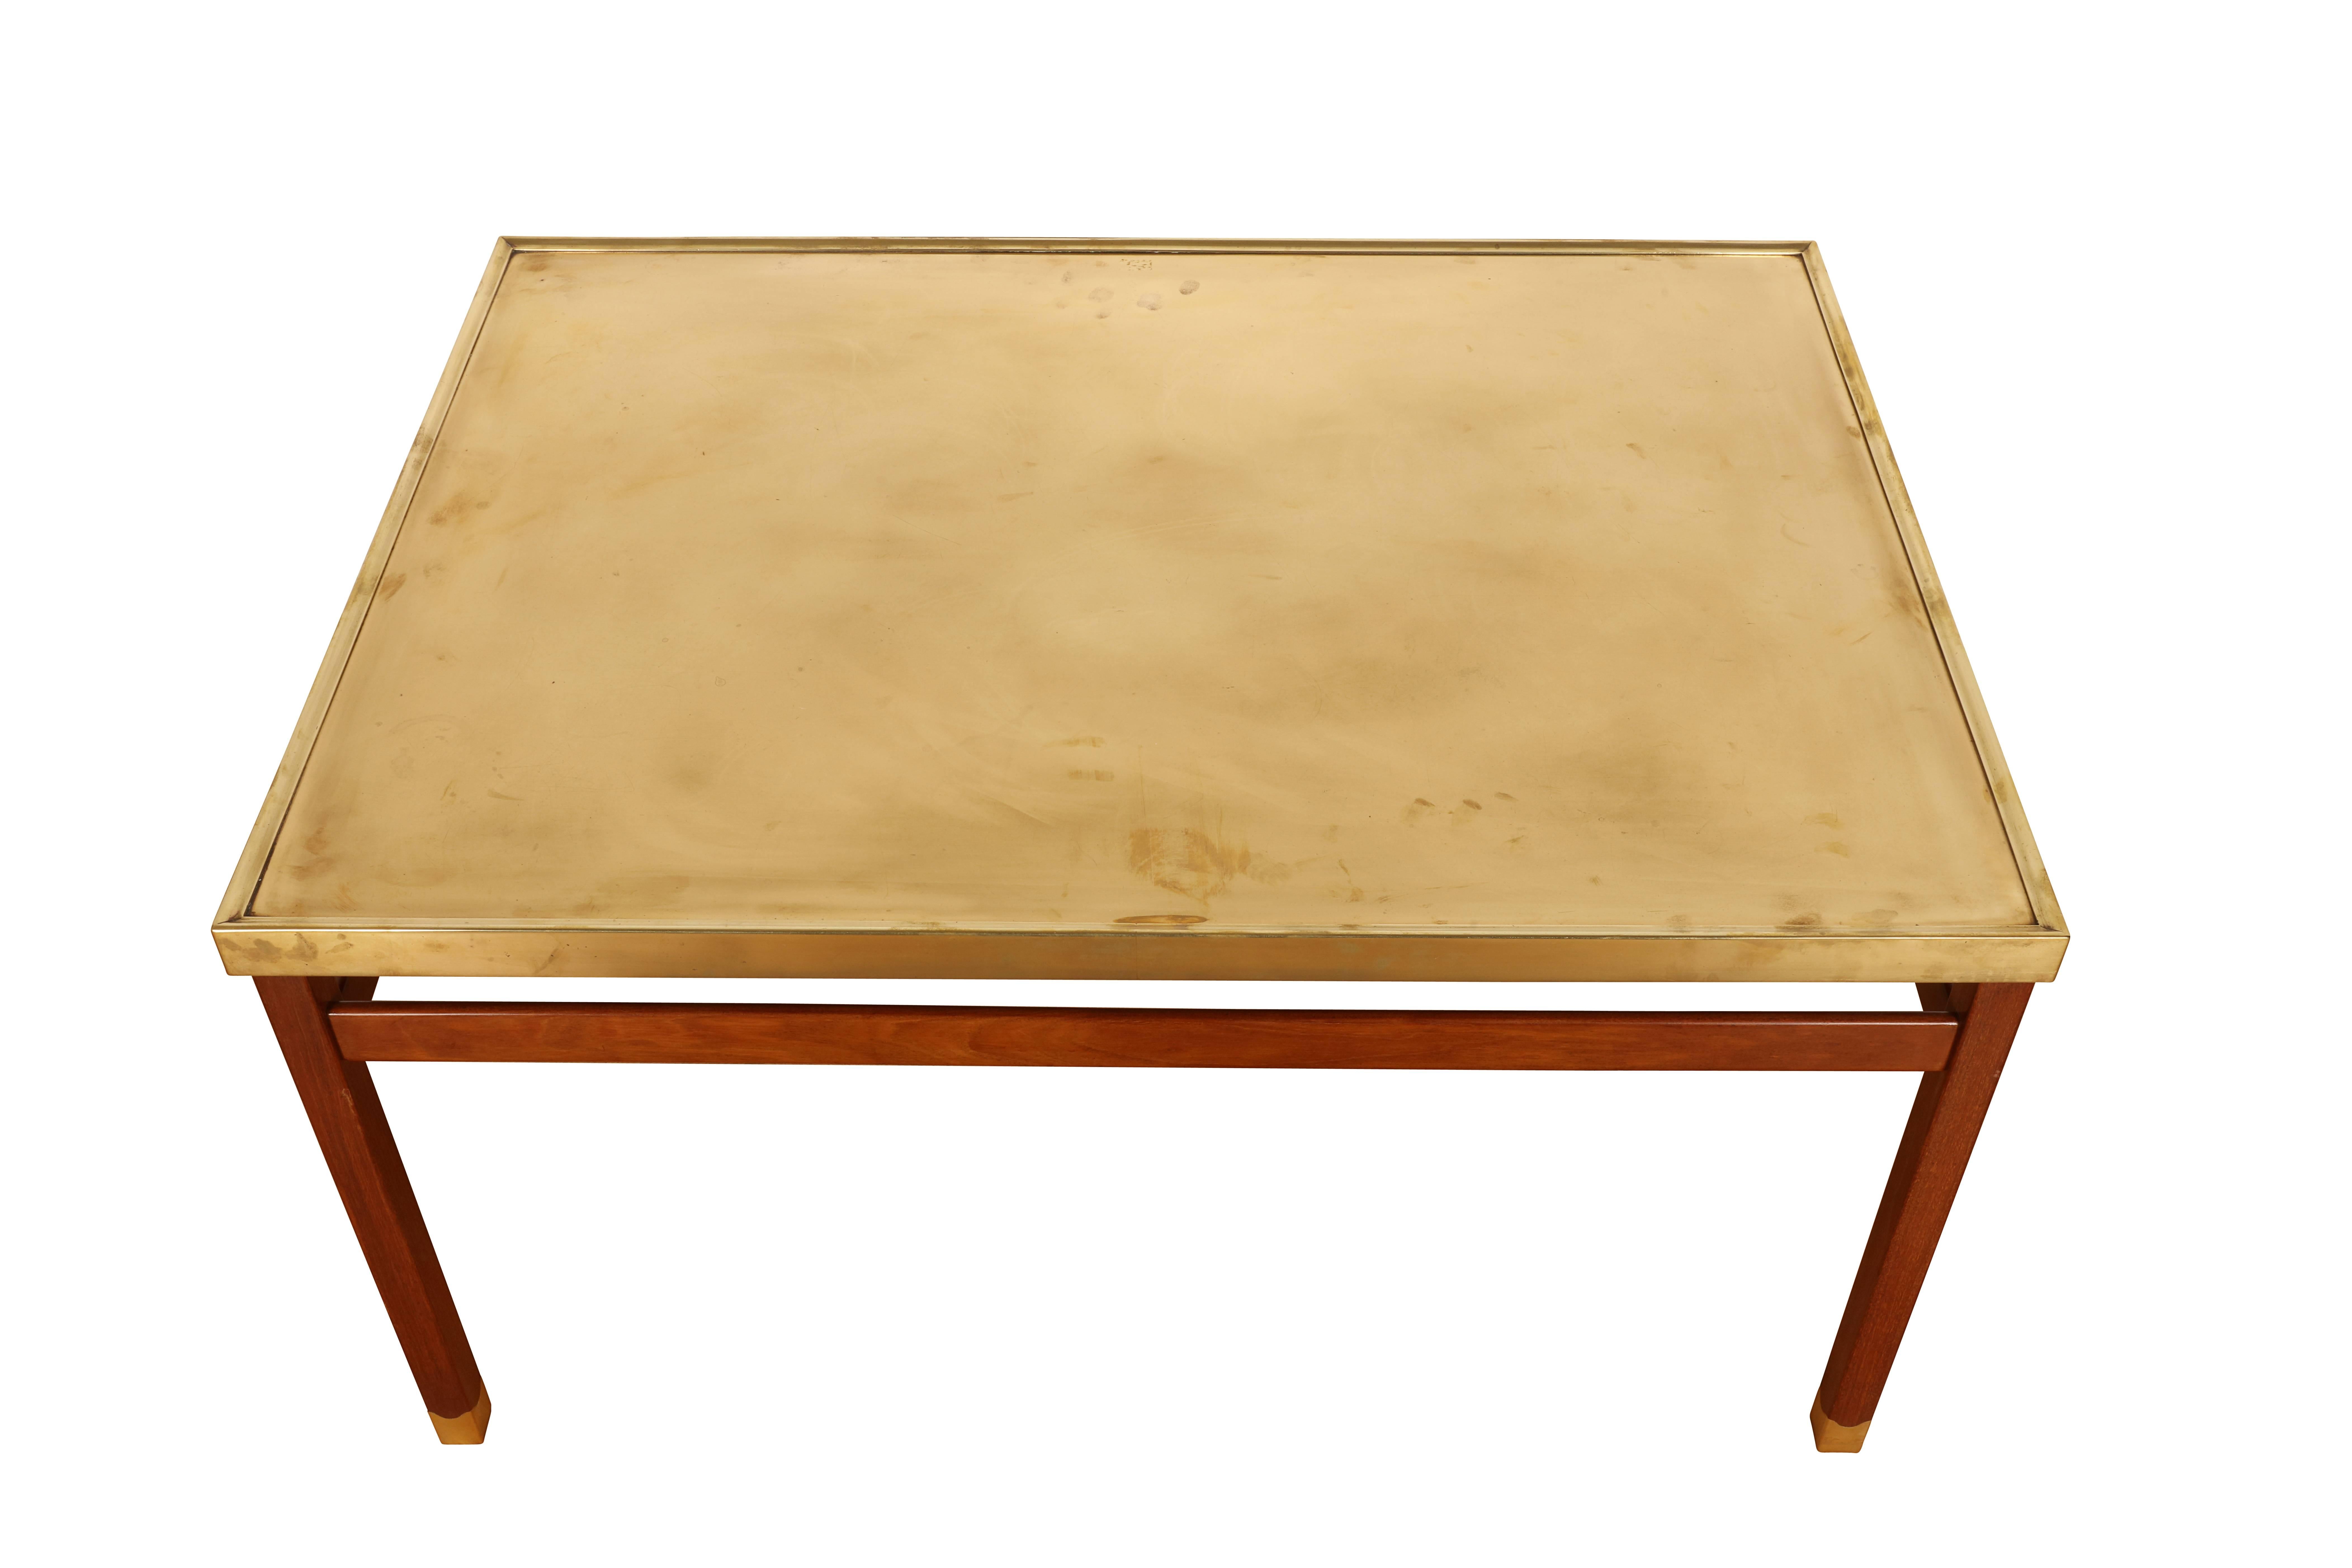 Unique rectangular coffee table. Brass top with moulded edges rests upon square Cuban mahogany legs including brass shoes with wavy lines. Legs connected by decorative stretchers.

Manufactured by master cabinetmaker Jacob Kjær.
Date of